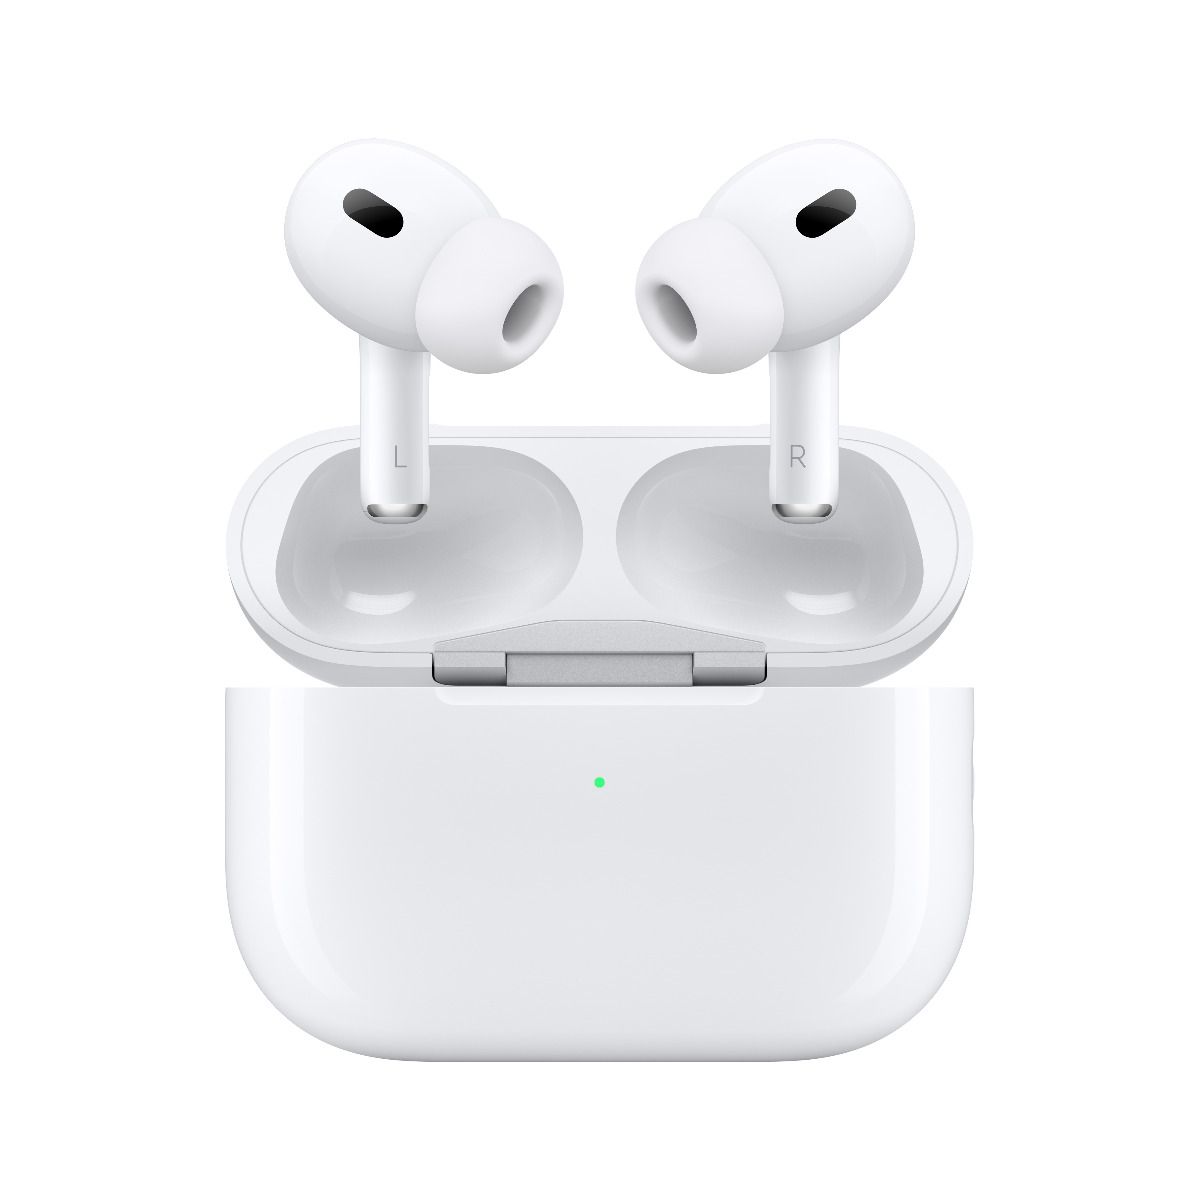 Buy AirPods Pro (2nd generation) Online at Best Price in Dubai